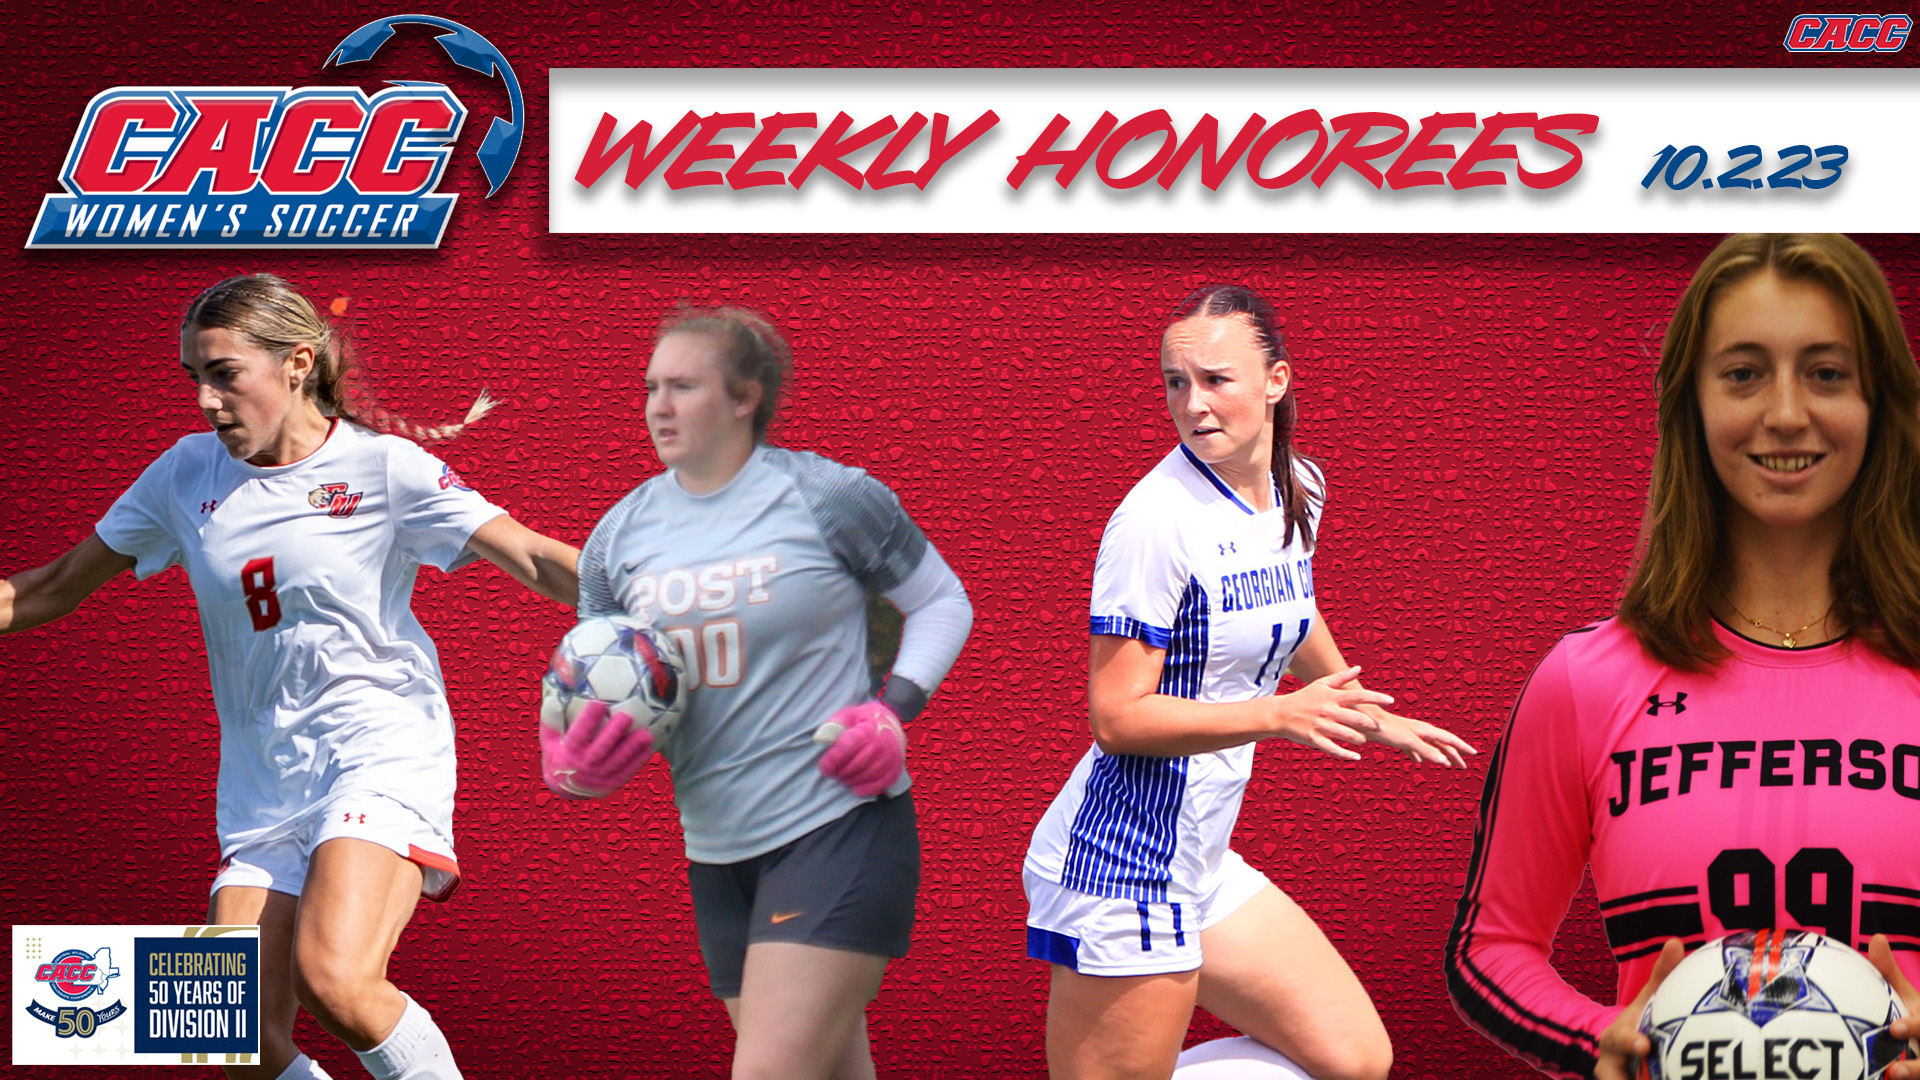 CACC Women's Soccer Weekly Honorees (10-2-23)